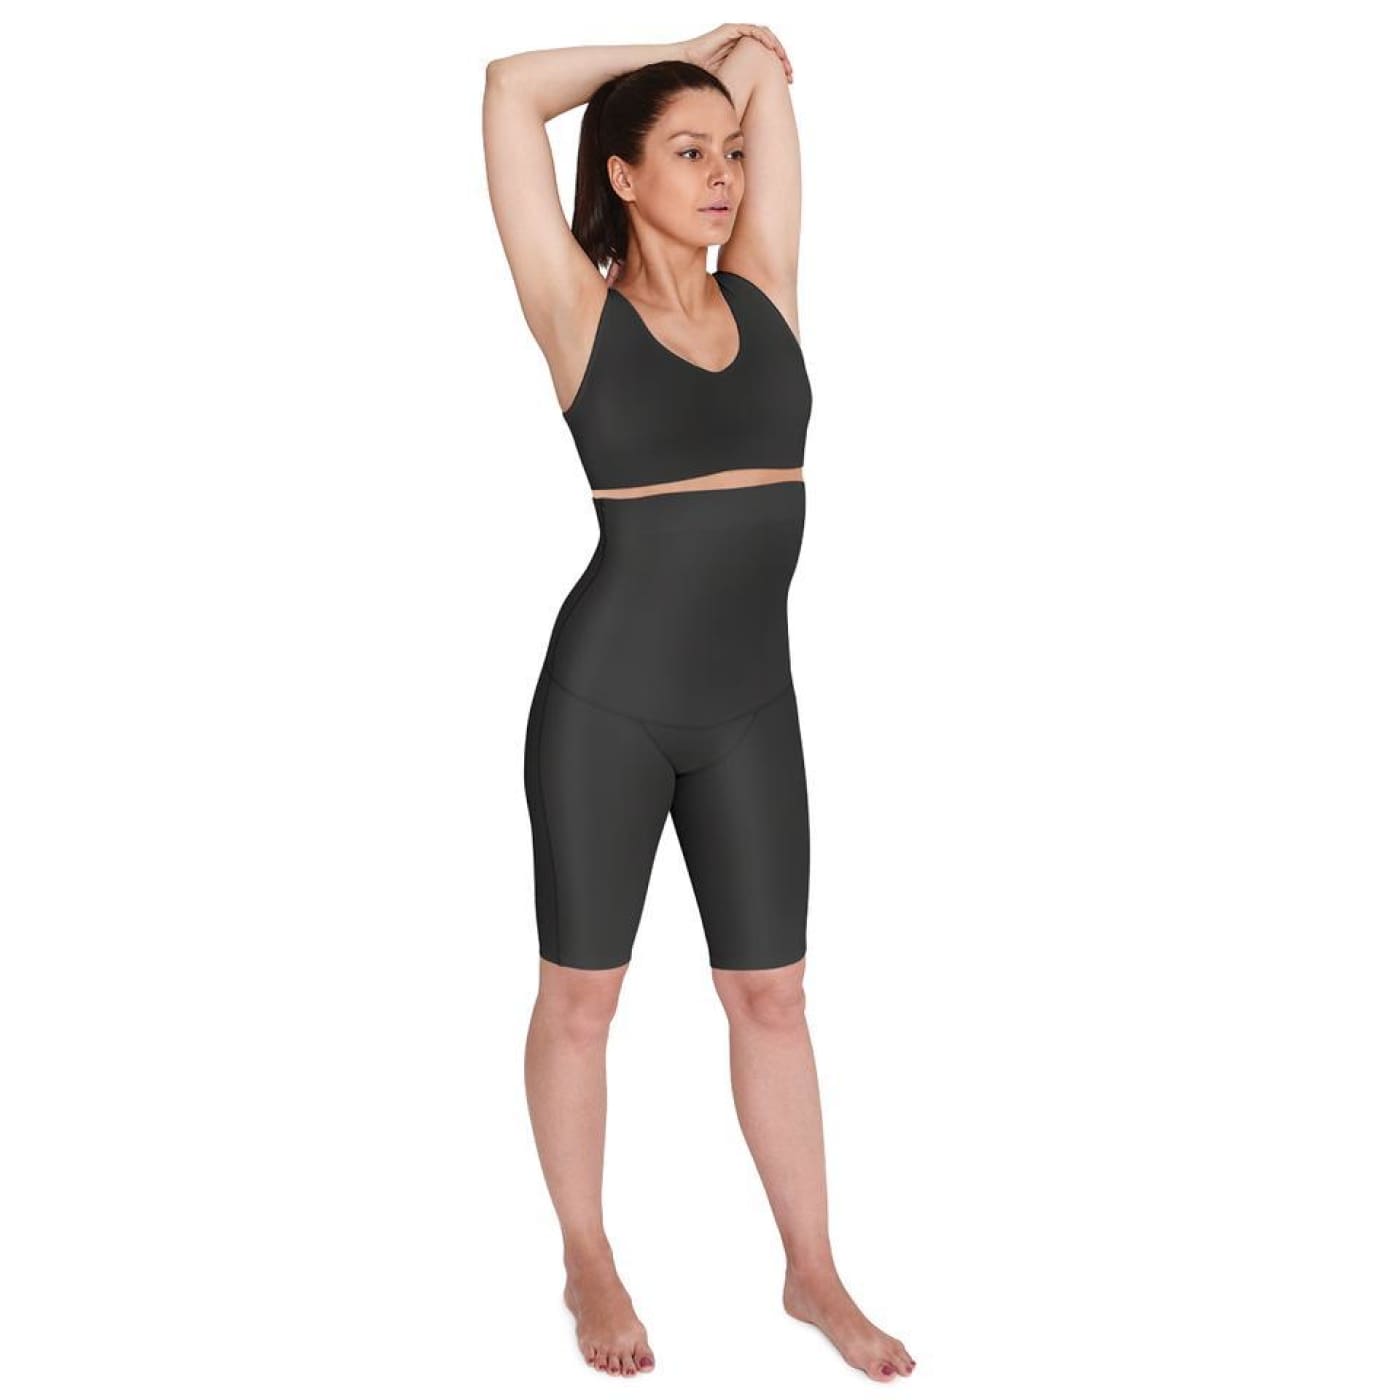 SRC Recovery Shorts - Black XS - FOR MUM - MATERNITY SUPPORT GARMENTS (PRE/POST)